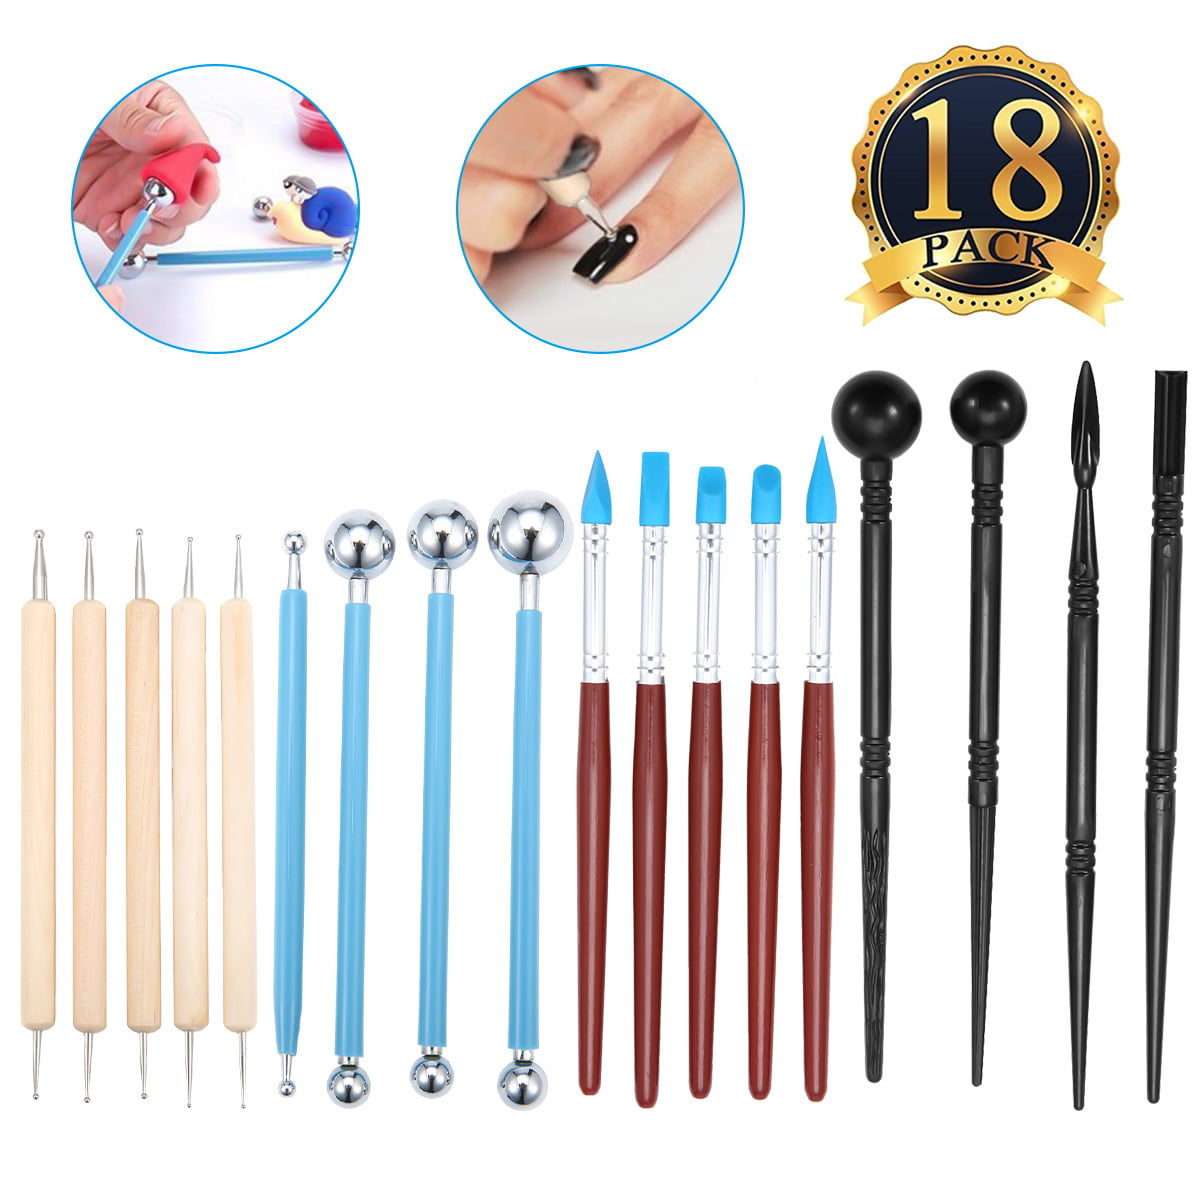 23x 5 Styles Clay Modeling & Pottery Sculpting Ball Stylus Dotting Tools Set